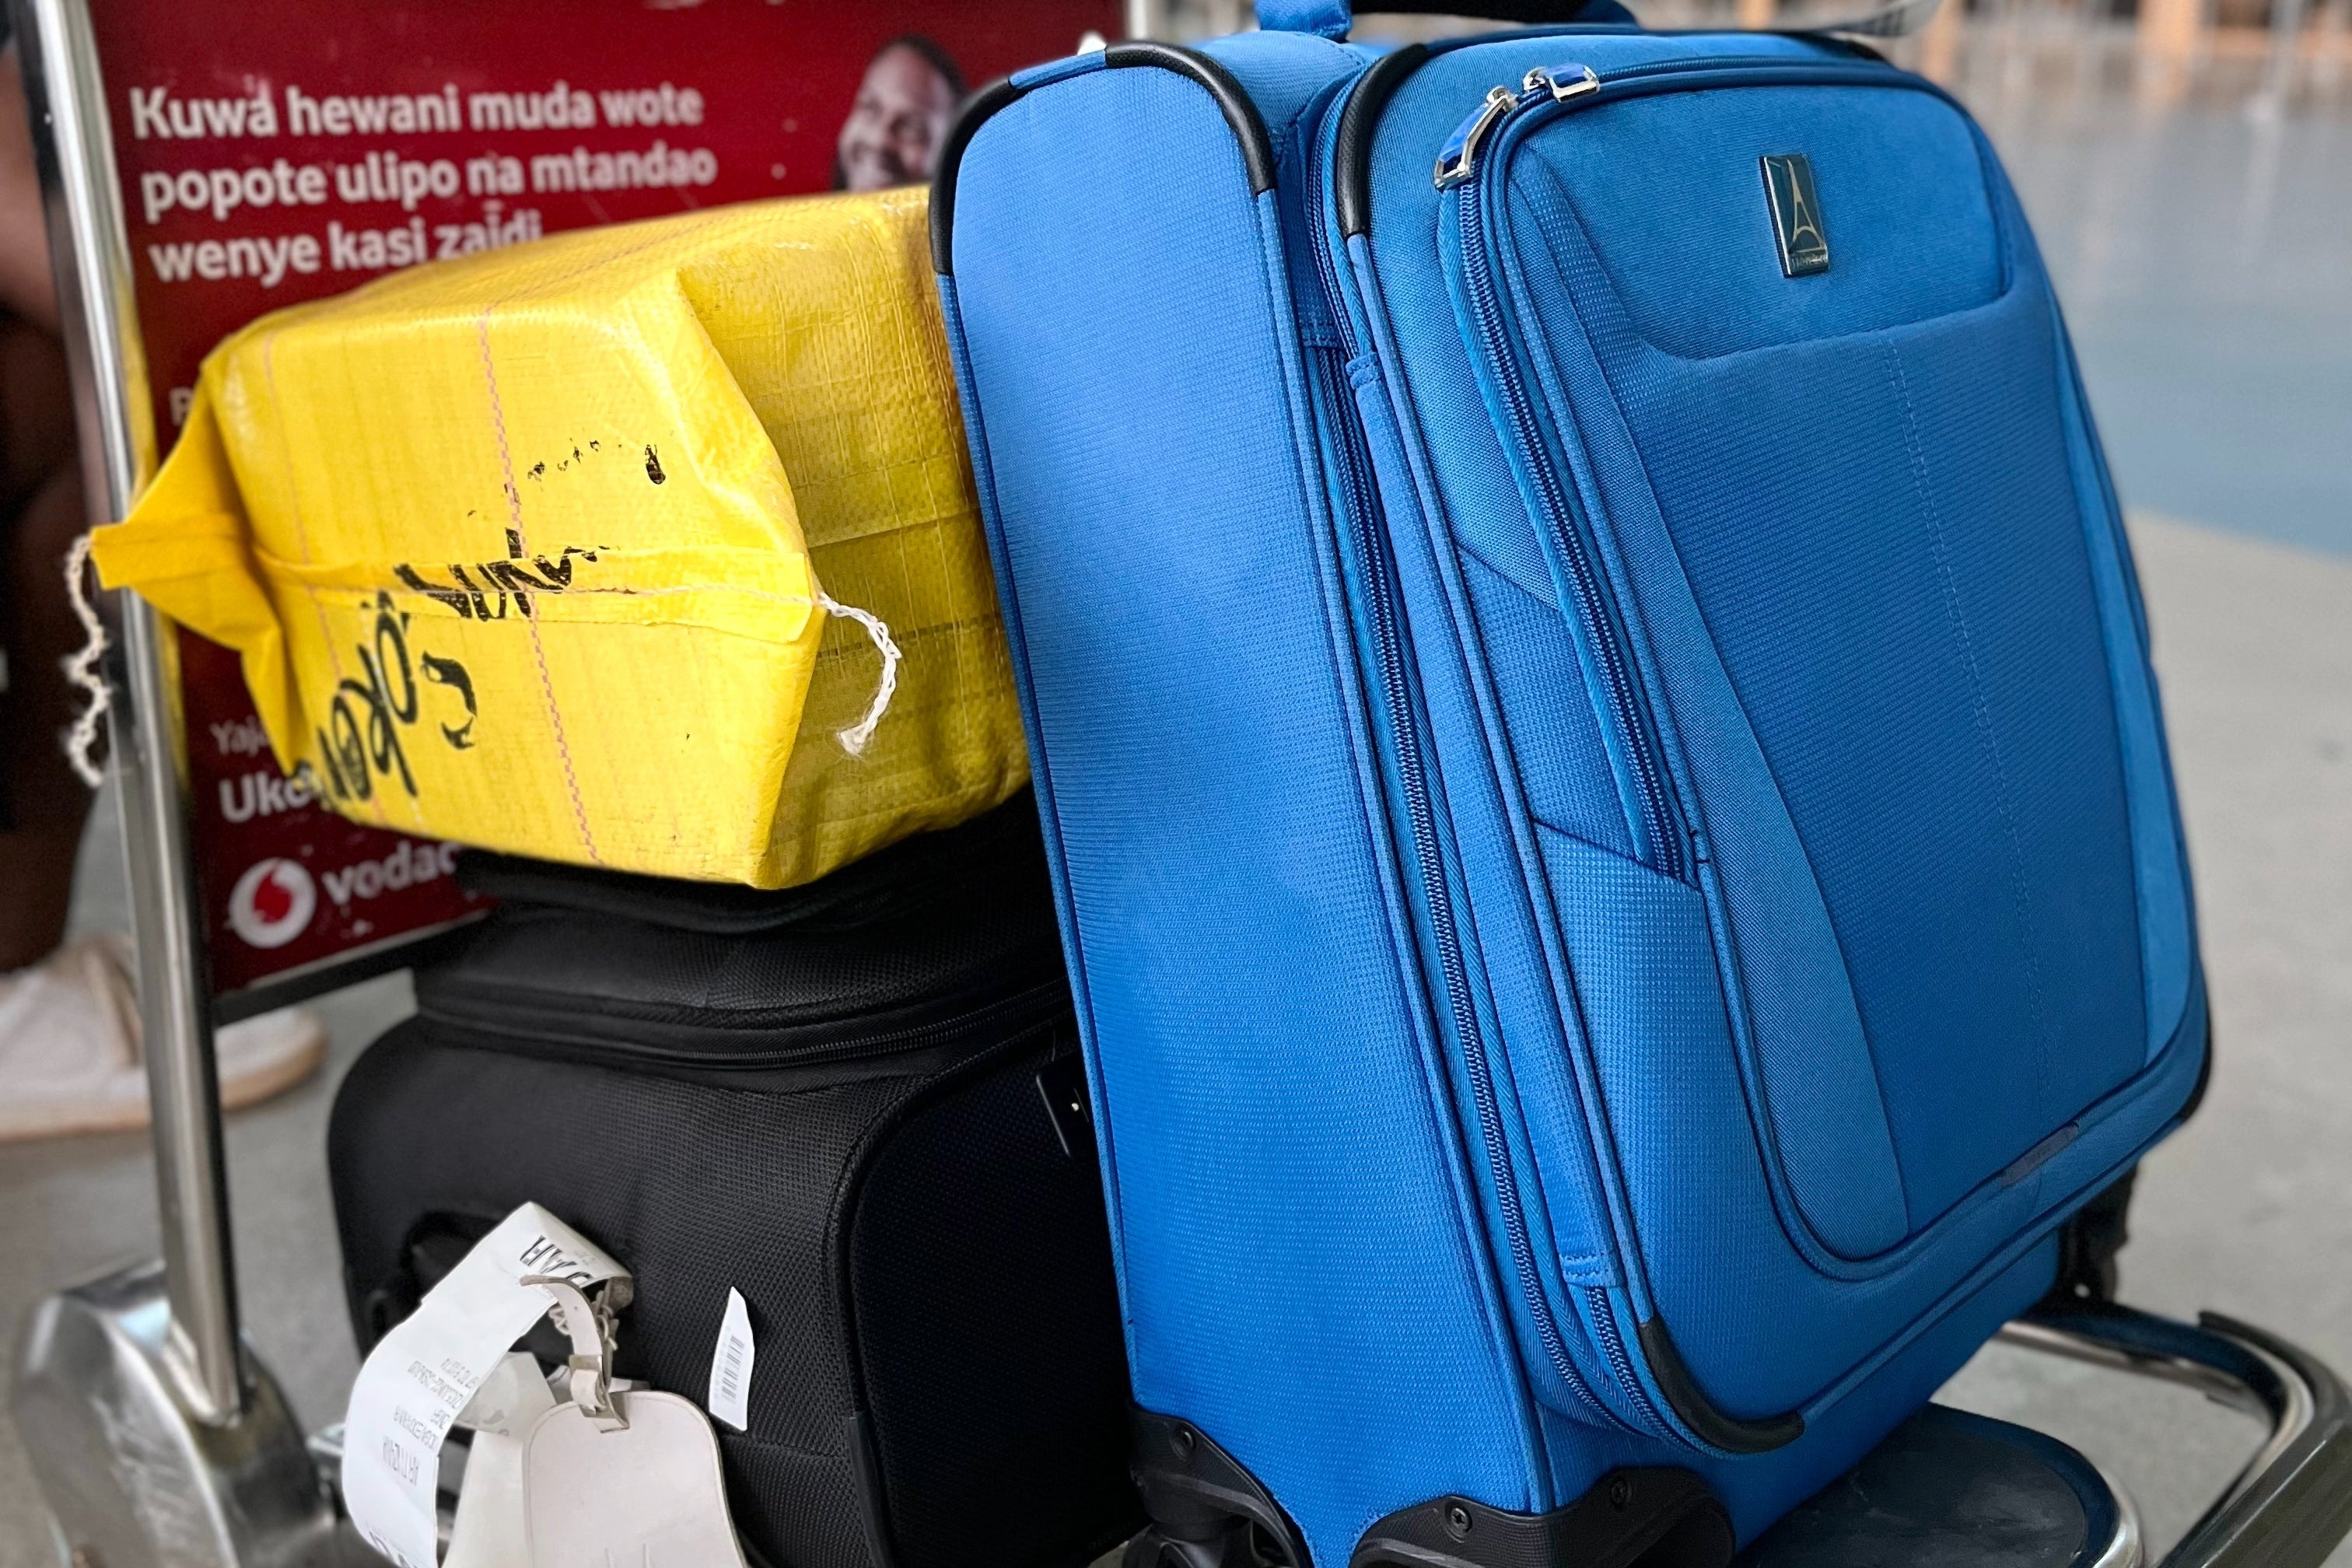 AirTags 5, Airlines 0: 5 curious stories of AirTags rescuing lost luggage